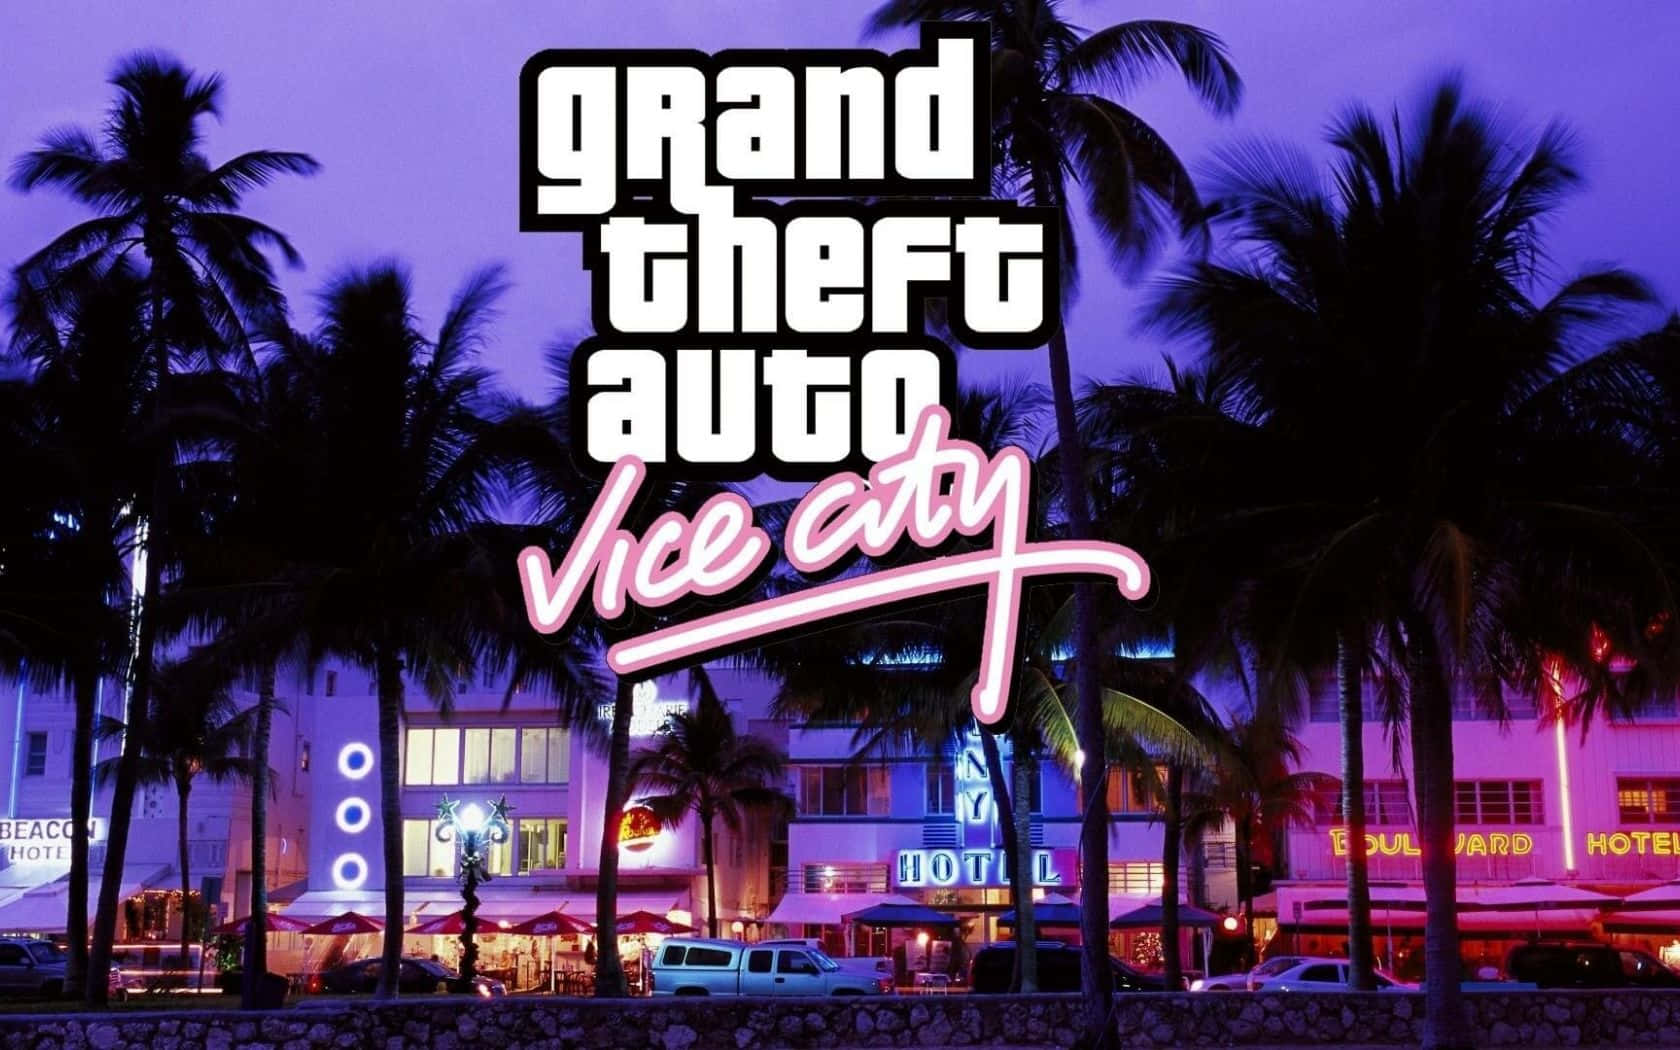 Experience the exhilarating life of crime in Grand Theft Auto Vice City Wallpaper